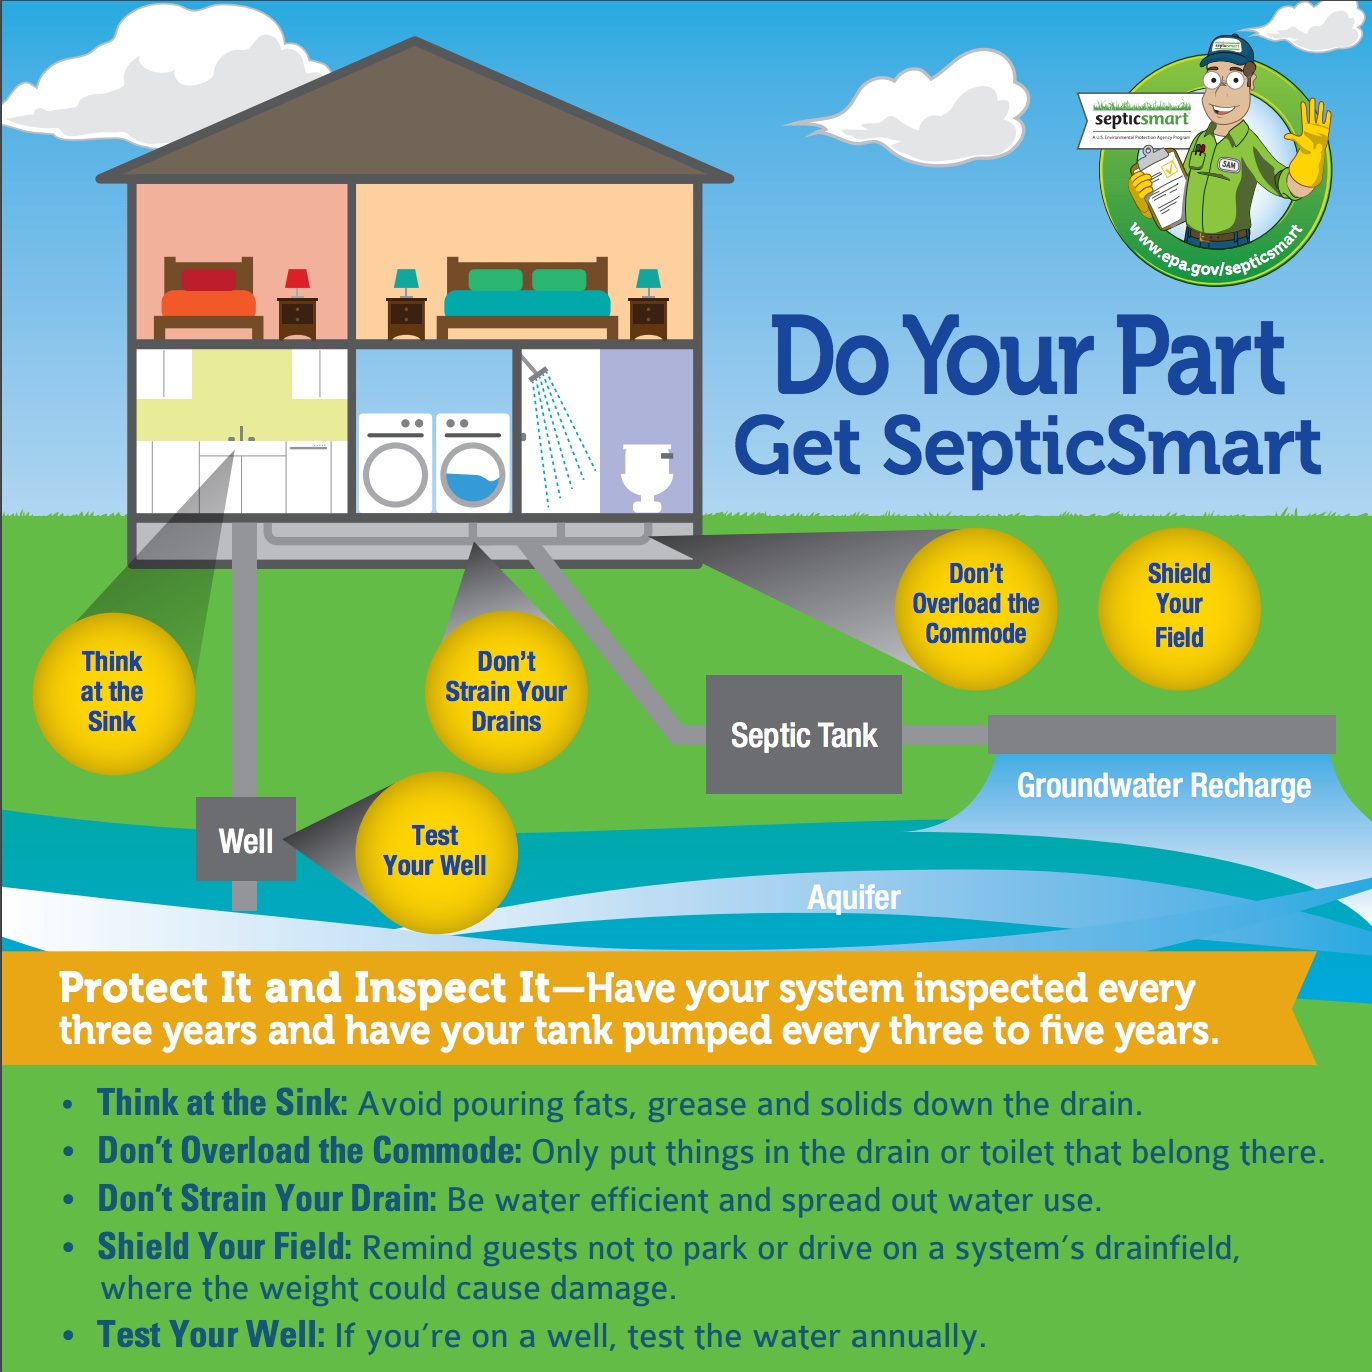 do your part - get septic smart